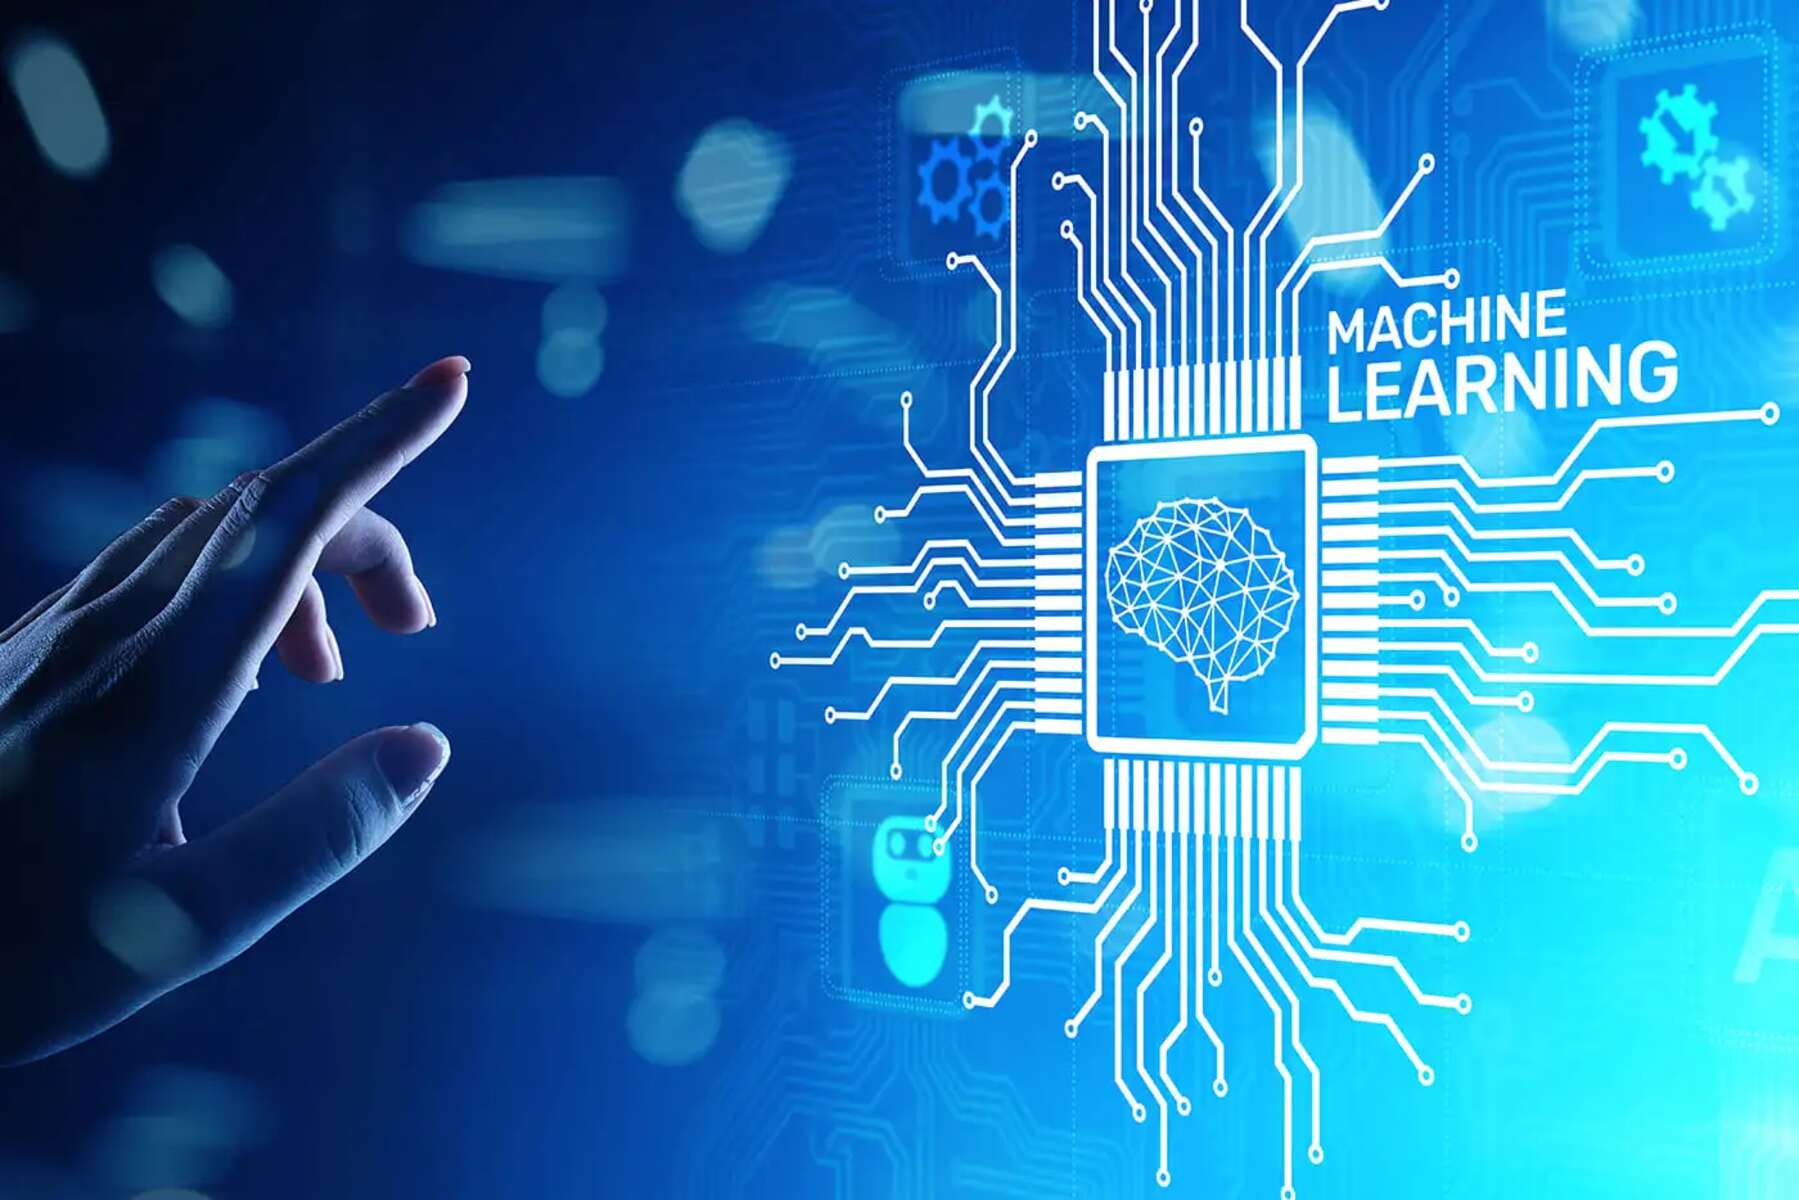 What Is Mean Absolute Error In Machine Learning